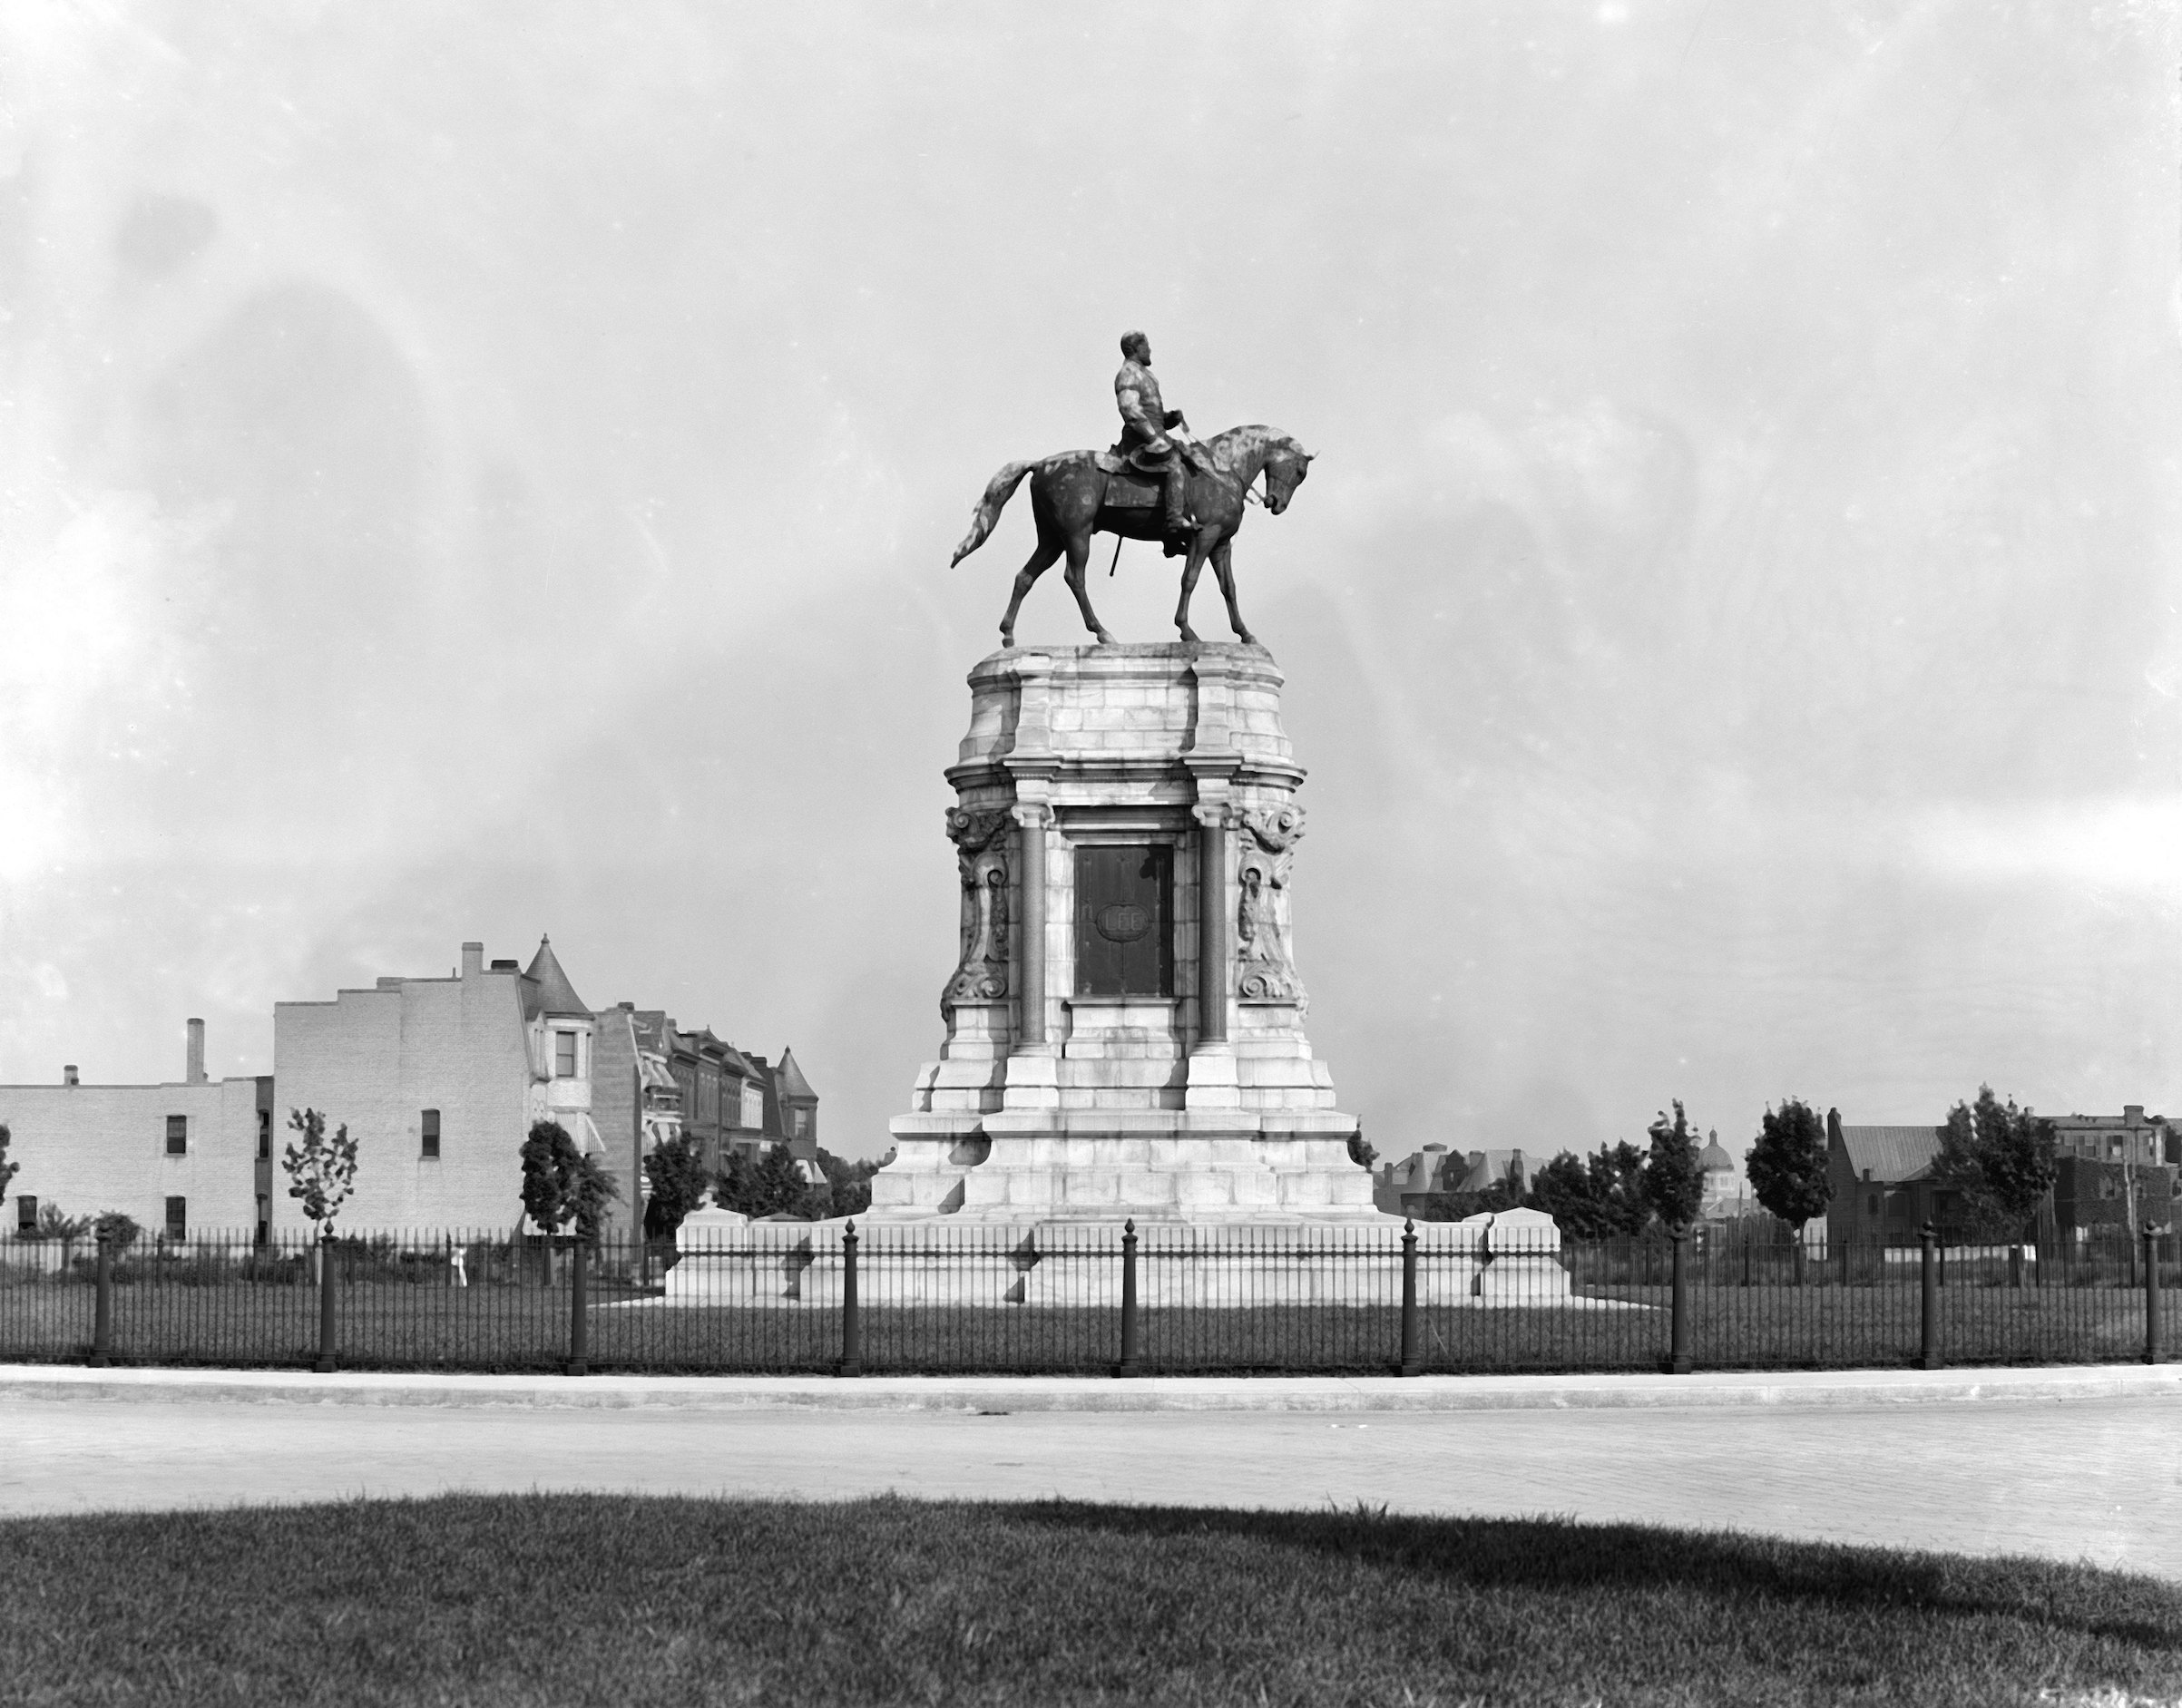 Equestrian statue of Robert E. Lee in Richmond in 1905. (Donaldson Collection/Getty Images)